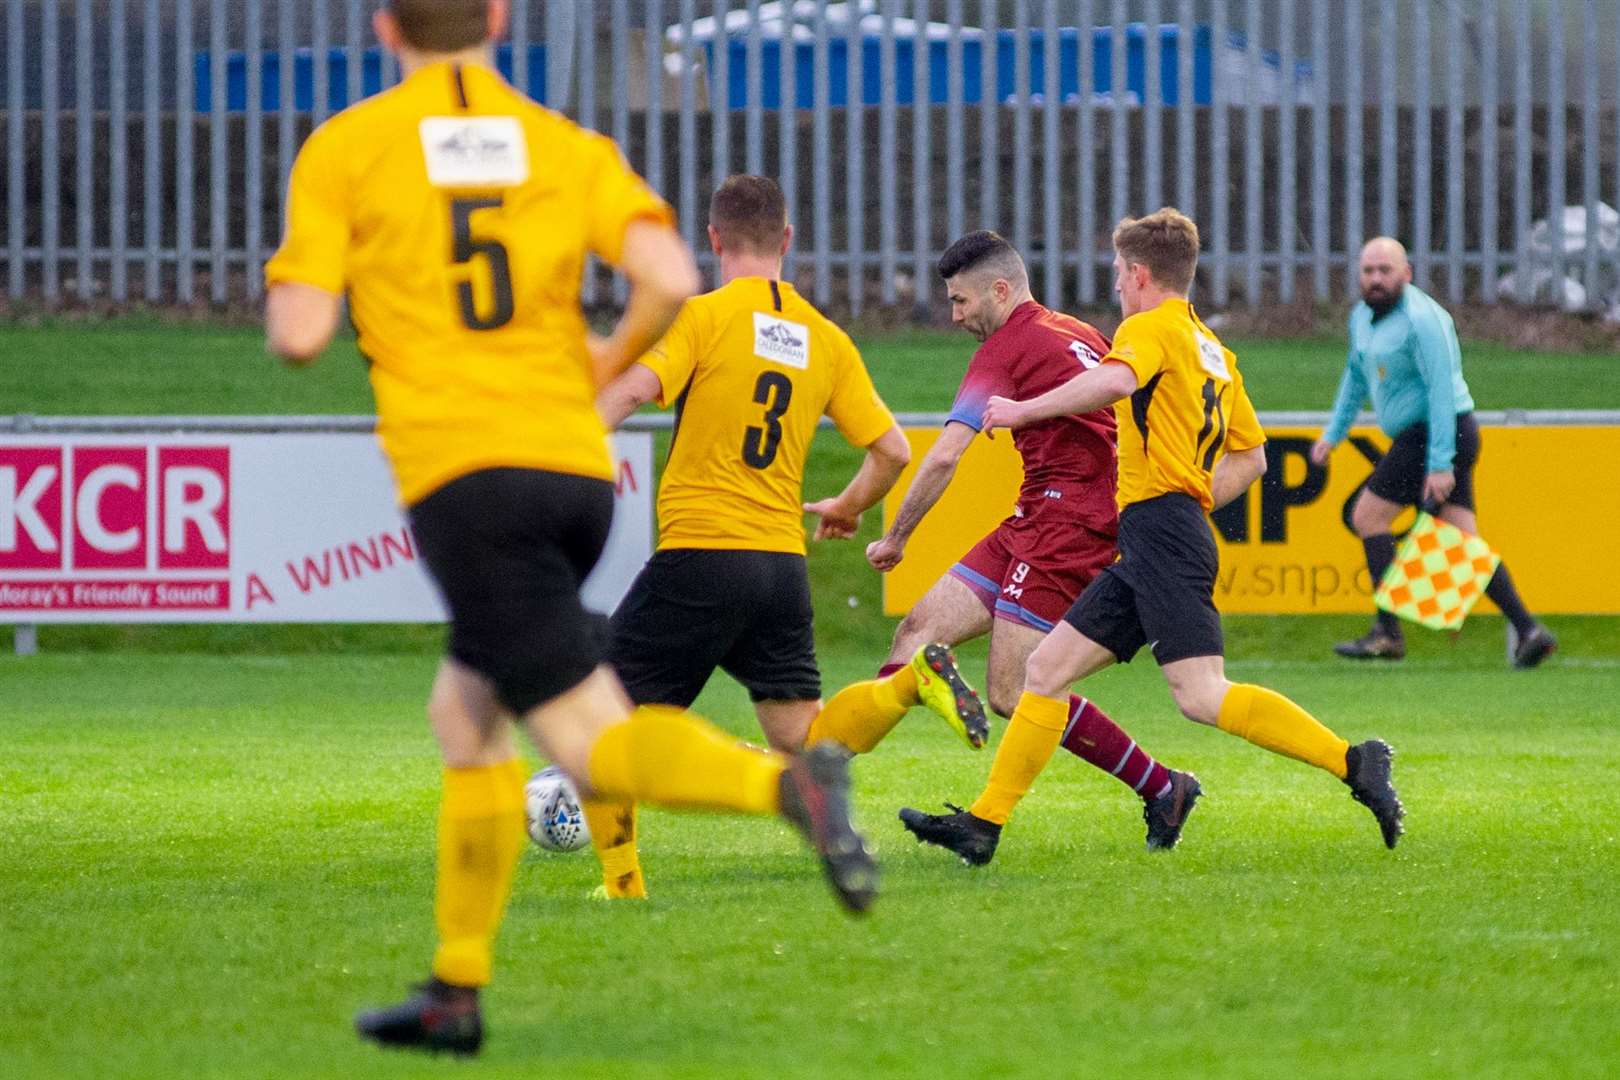 Keith skipper Cammy Keith opens the scoring for the home team...Keith FC (5) vs Fort William (1) - Scottish Cup Second Preliminary Round - Kyncoh Park, Keith 12/12/2020...Picture: Daniel Forsyth..